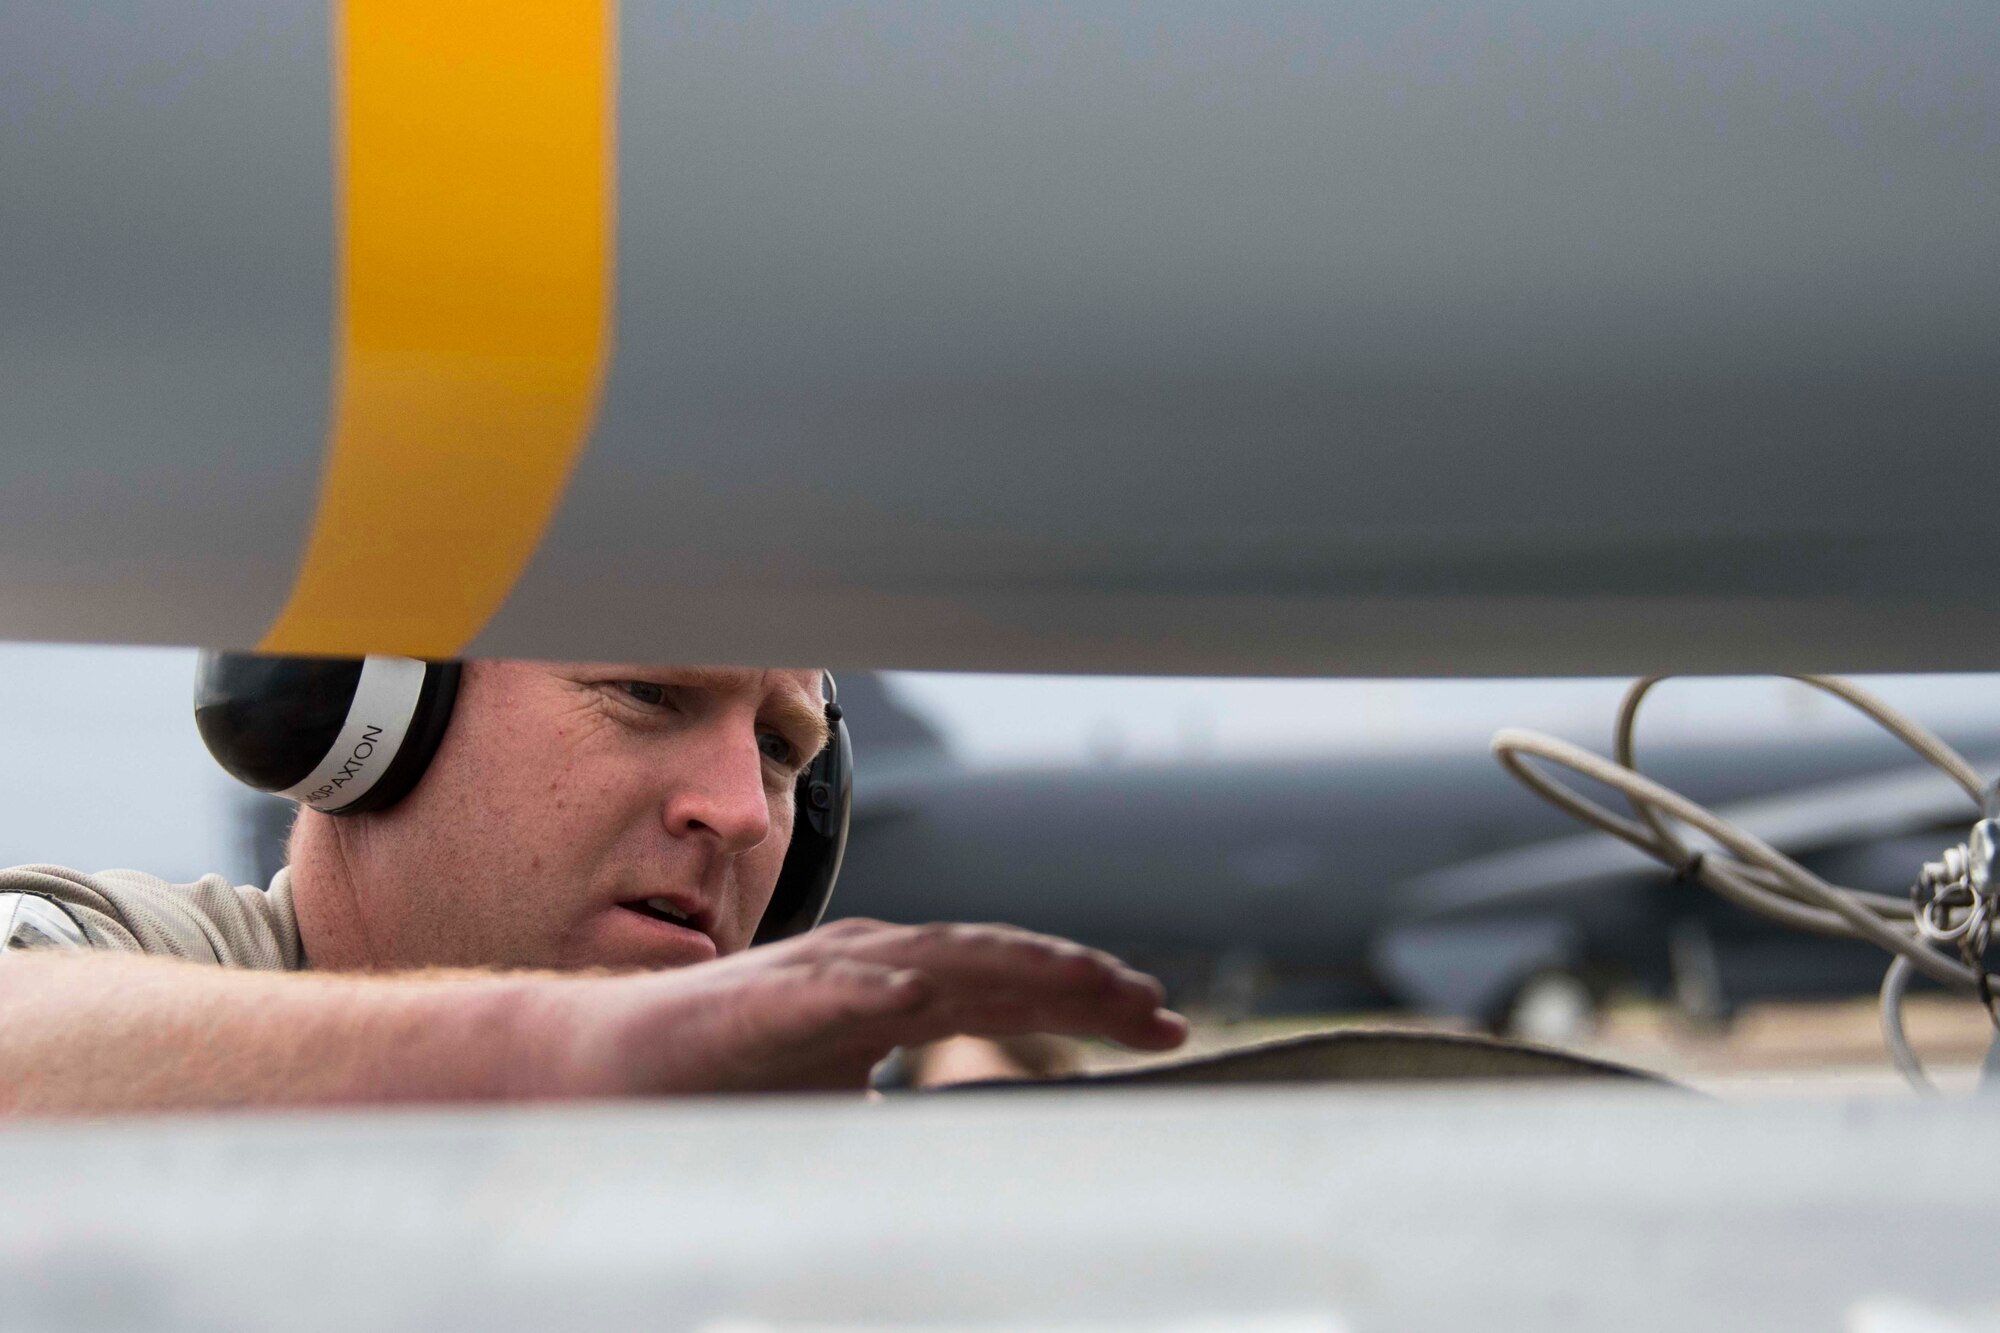 U.S. Air Senior Master Sgt. John Paxton, 307th Aircraft Maintenance Squadron aircraft armament systems superintendent, inspect an AGM-158 Joint Air-to-Surface Standoff Missile prior to loading on a Conventional Rotary Launcher at Barksdale Air Force Base, Louisiana, Feb. 6, 2019.  The JASSM’s were part of a test conducted by Reserve Citizen Airmen and active duty to see if upgrades to the CRL would allow it to power eight of the munitions simultaneously.  (U.S. Air Force photo by Master Sgt. Ted Daigle)